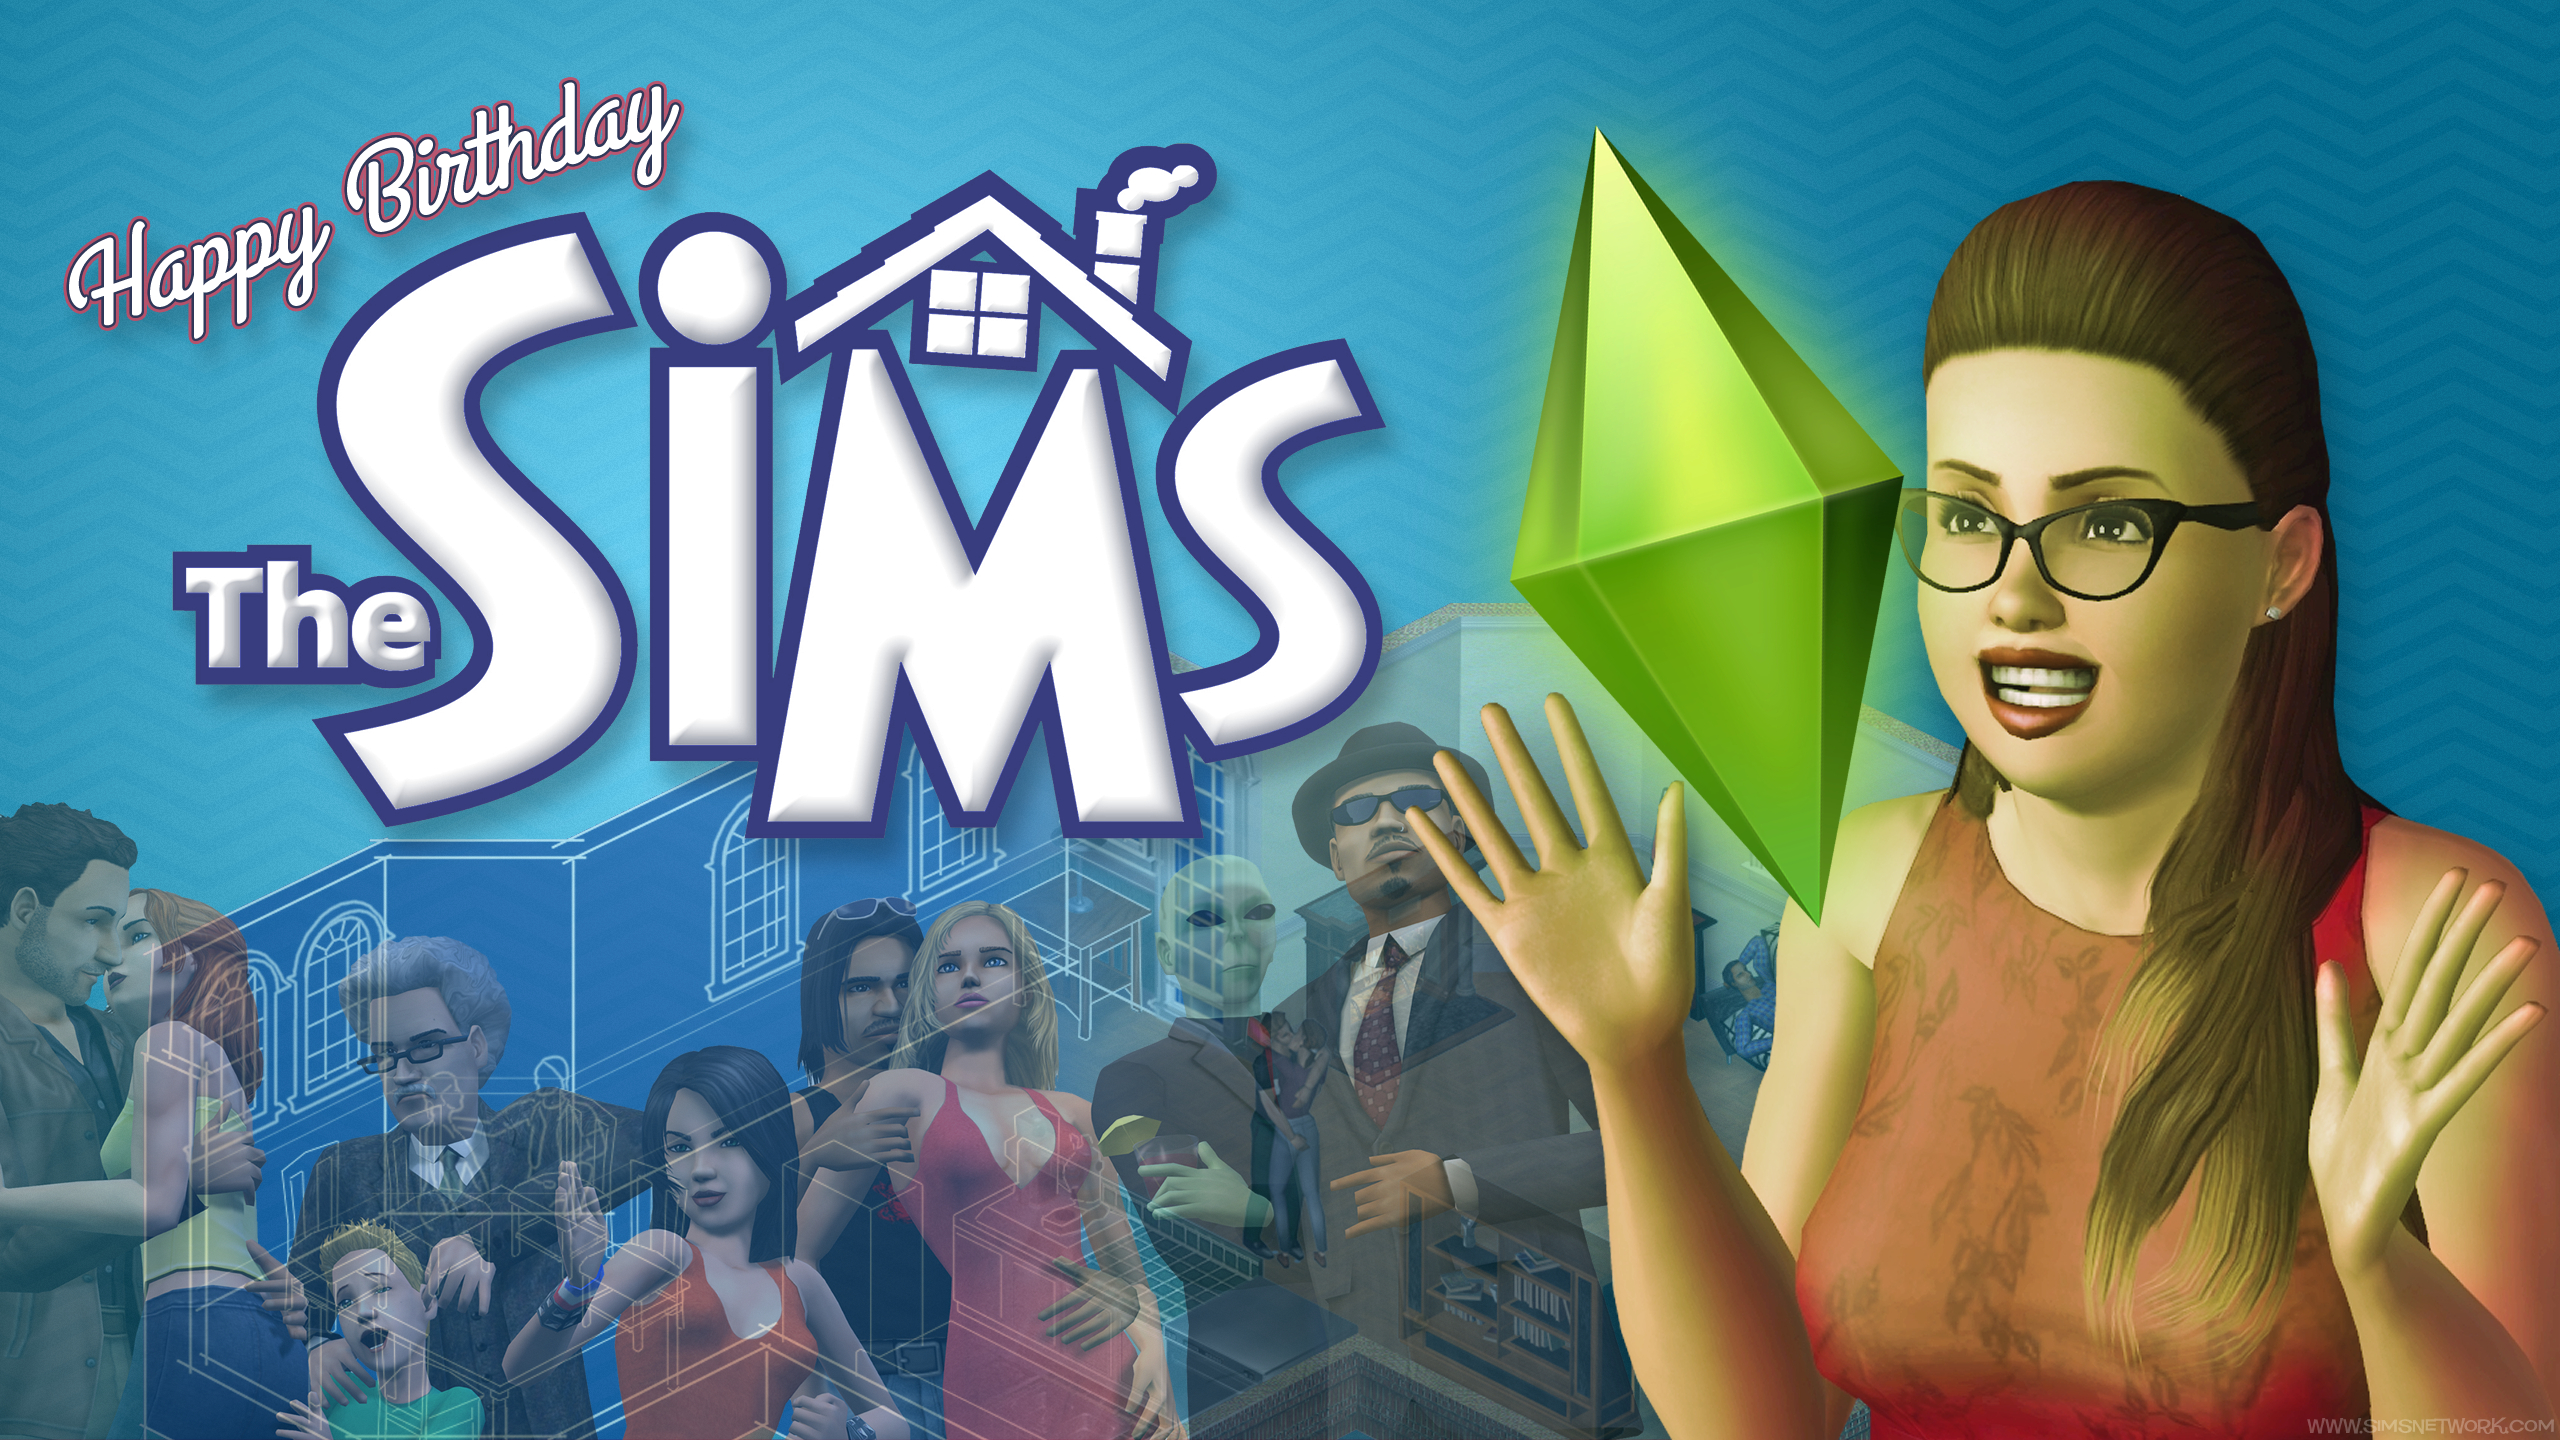 2560x1440 The Sims Anniversary 2014 | SNW